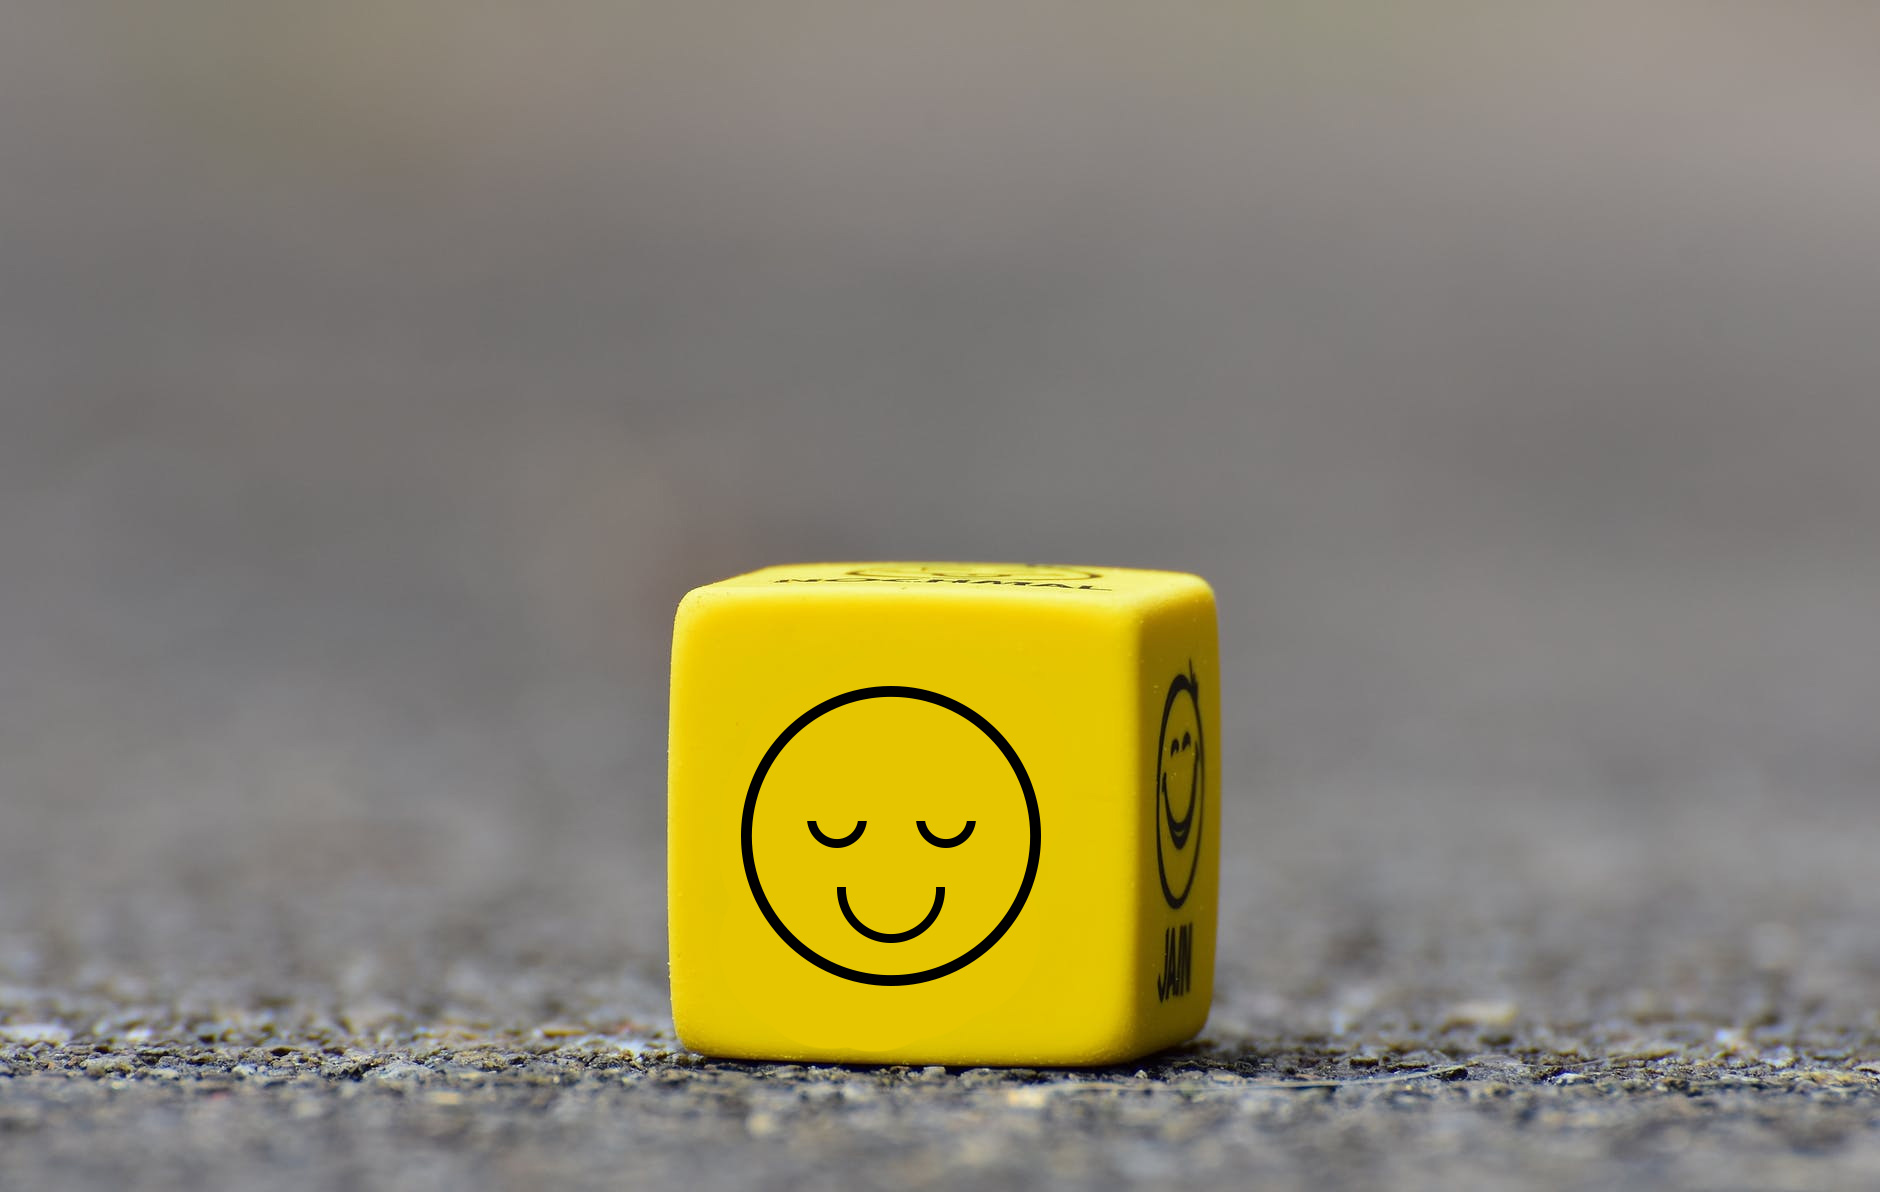 Yellow block with smiling face